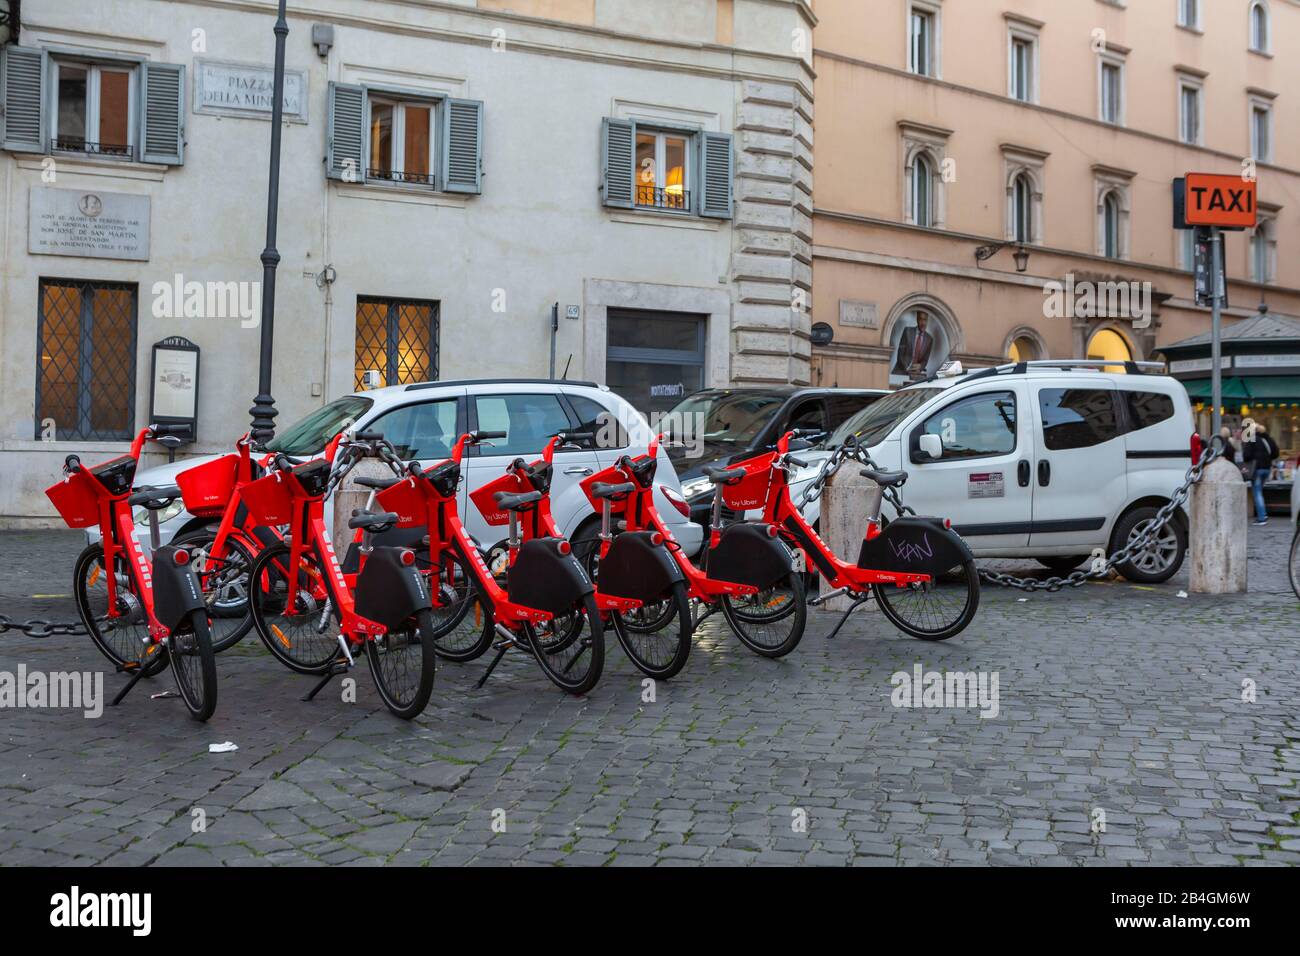 A row of Uber Jump electric bikes lined up alongside taxis waiting for passengers in a piazza in Rome Stock Photo